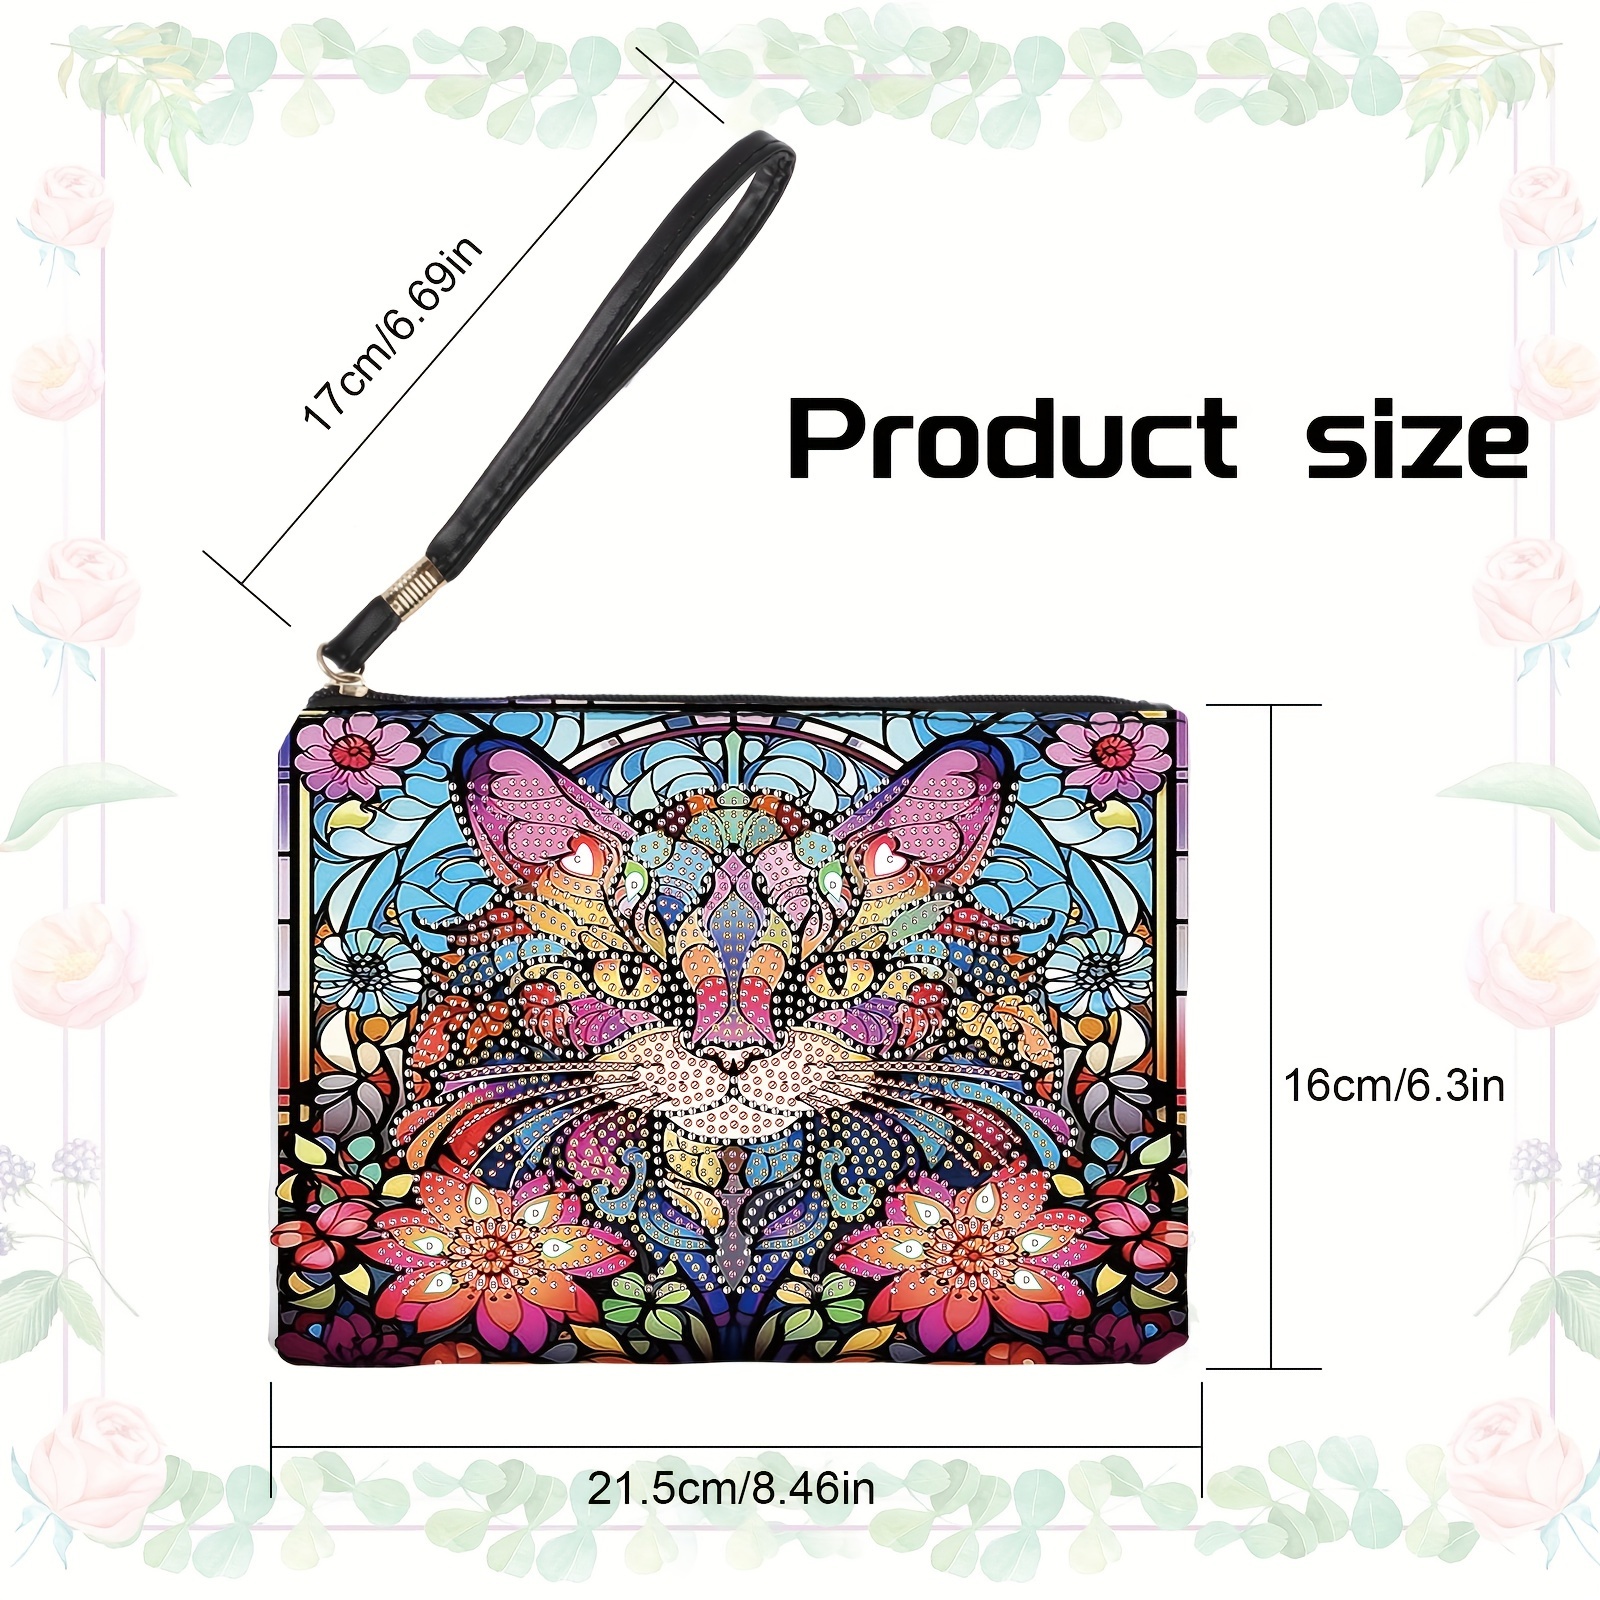 Diy Cat Diamond Painting Clutch Bags Size Soft Leather Handbag And Purse  For Women Crystal Rhinestones Cat Diamond Art Clutch Purse 5d Diamond  Painting Handbag Kit Special Shaped Diamond Art Purses And